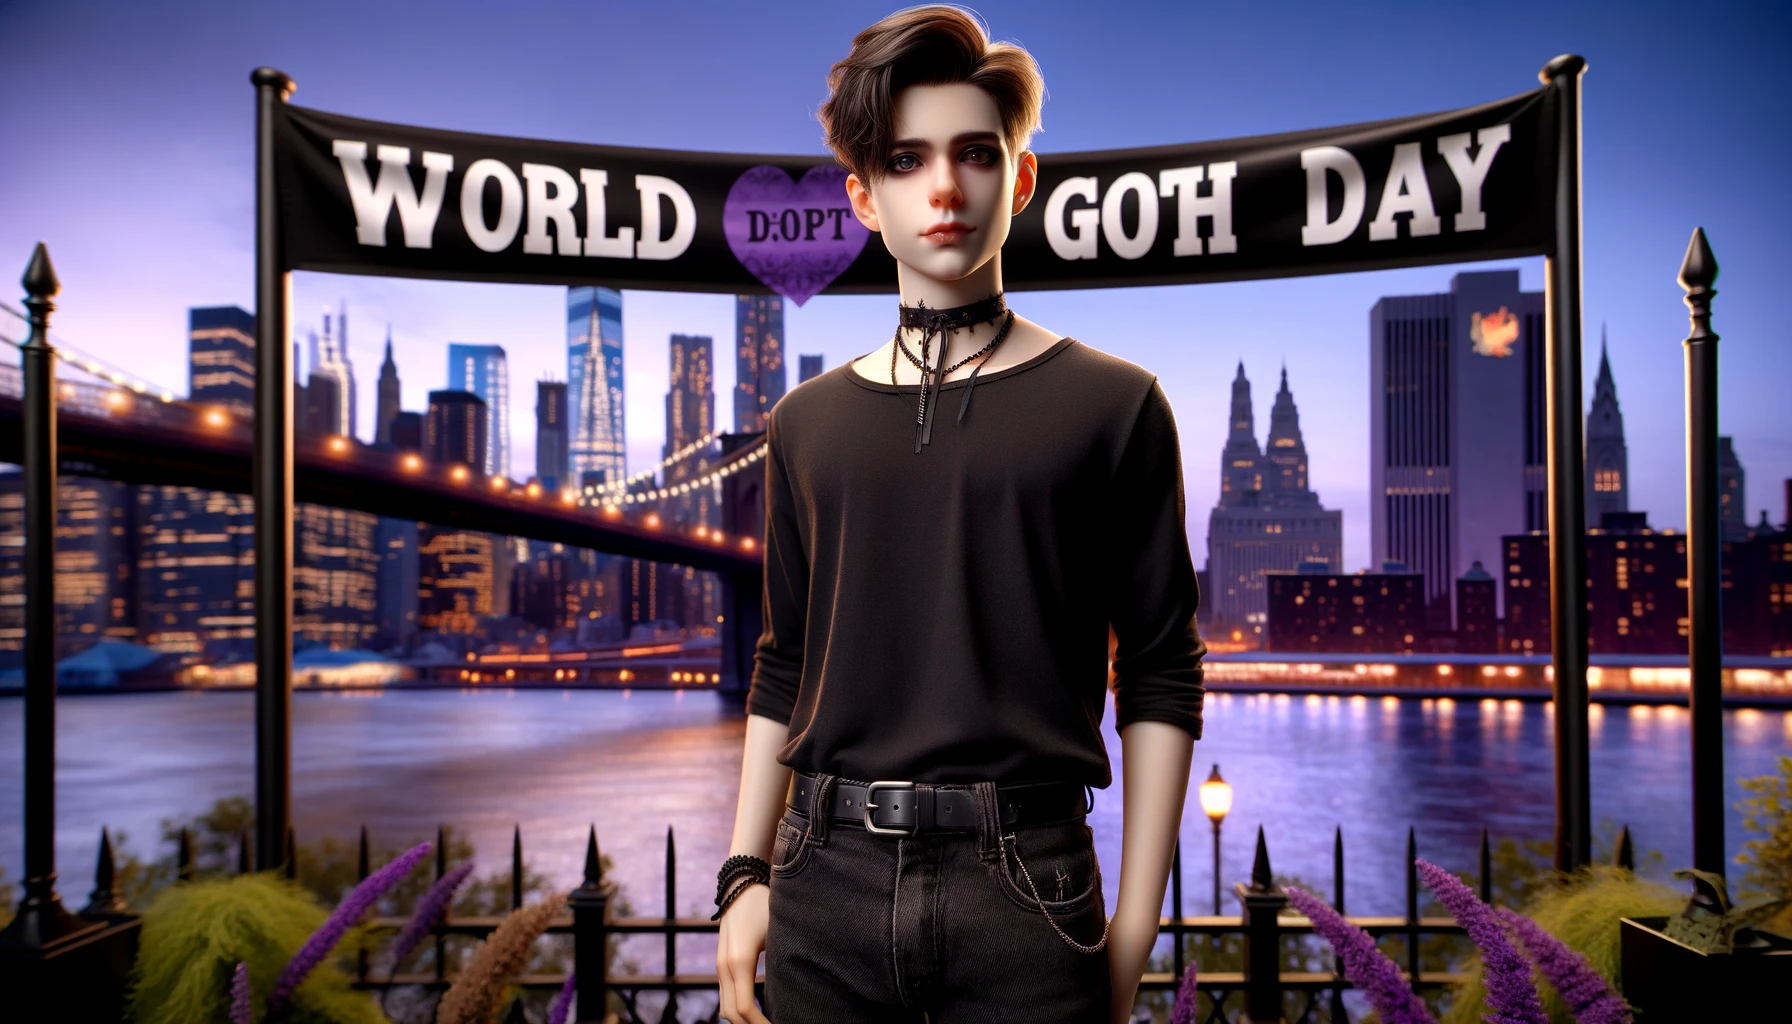 Deepest World Goth Day Wishes for True Goths